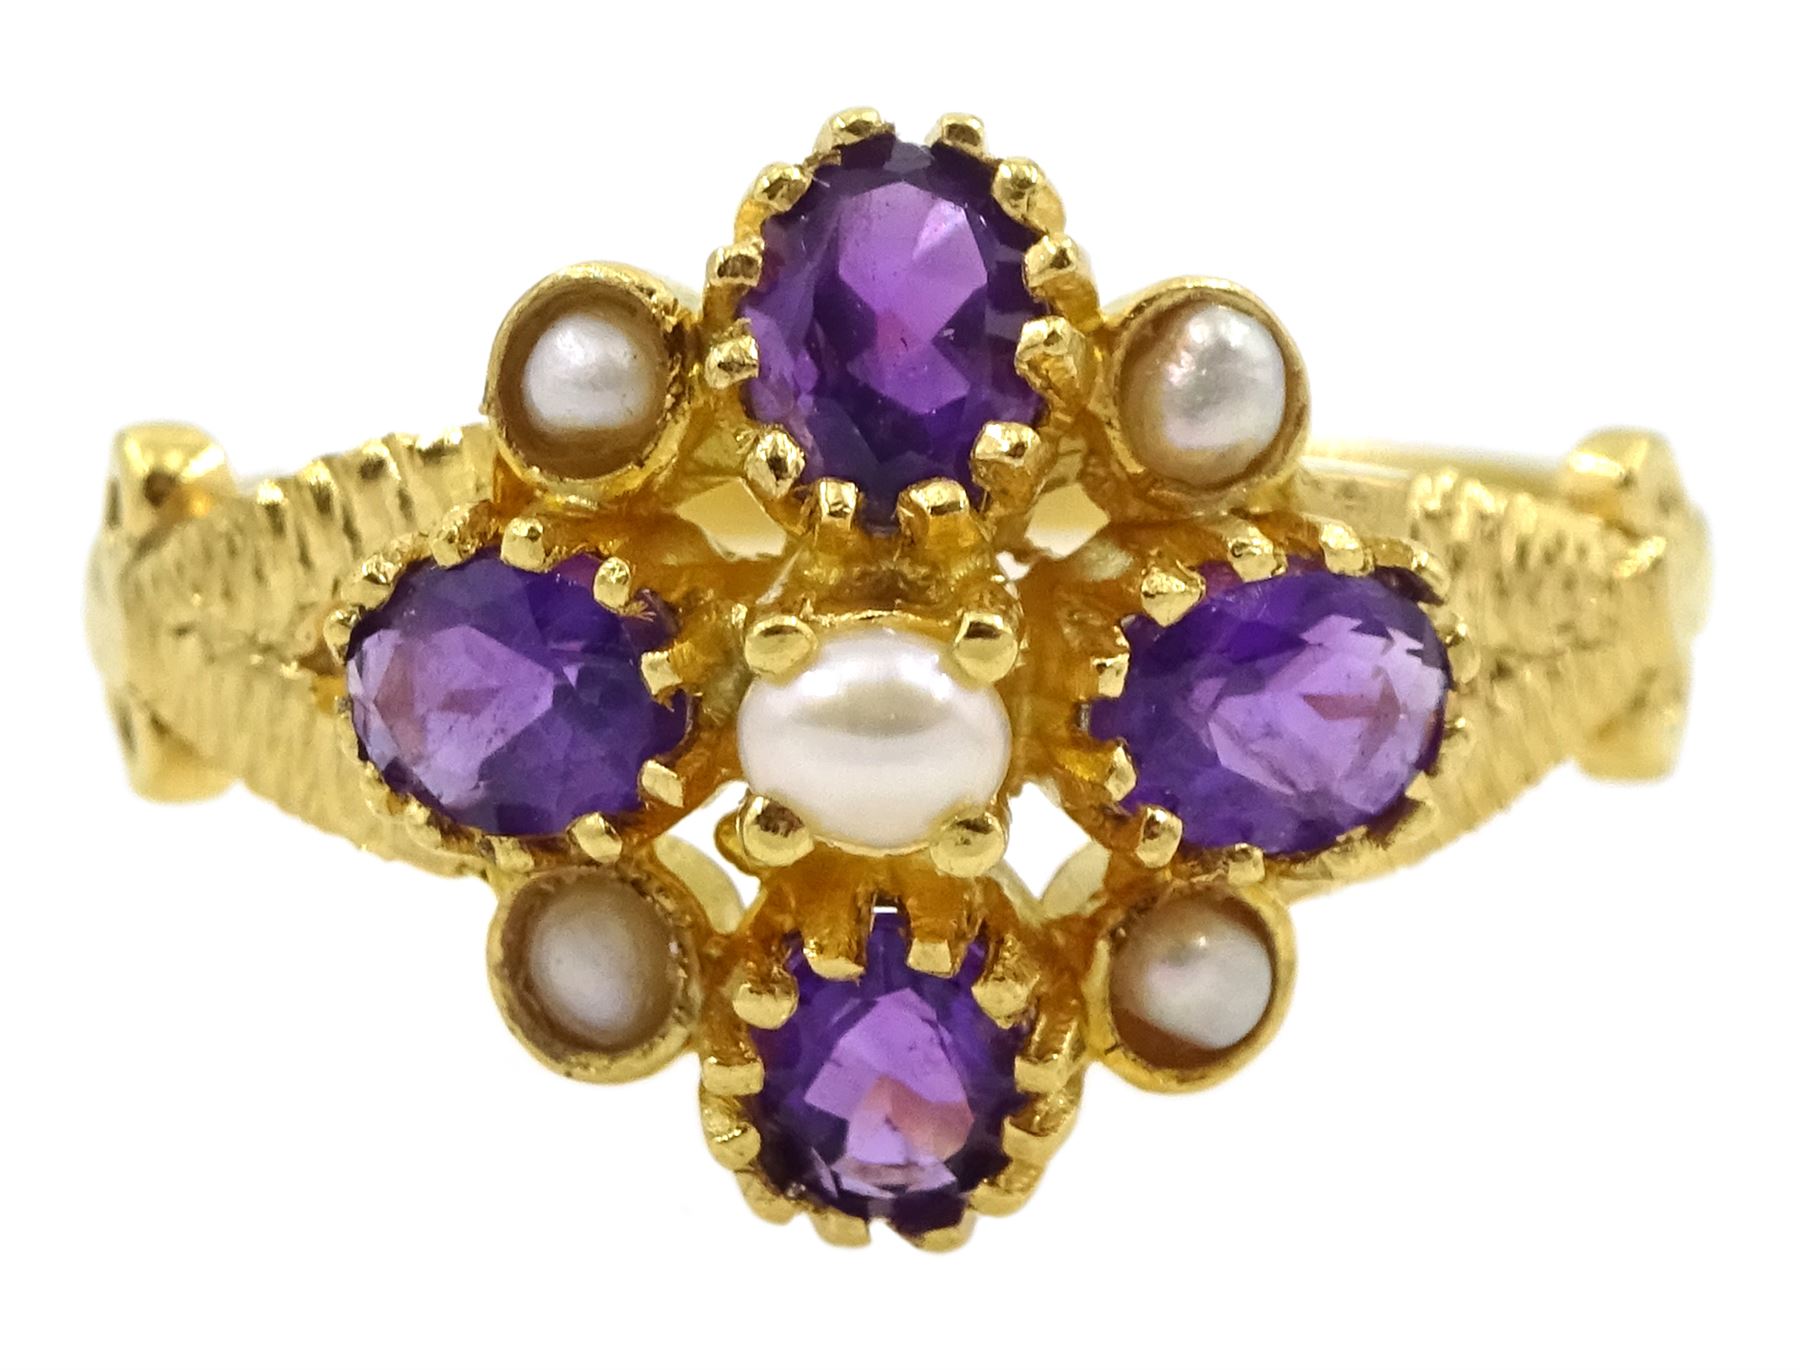 Silver-gilt amethyst and pearl flower cluster ring